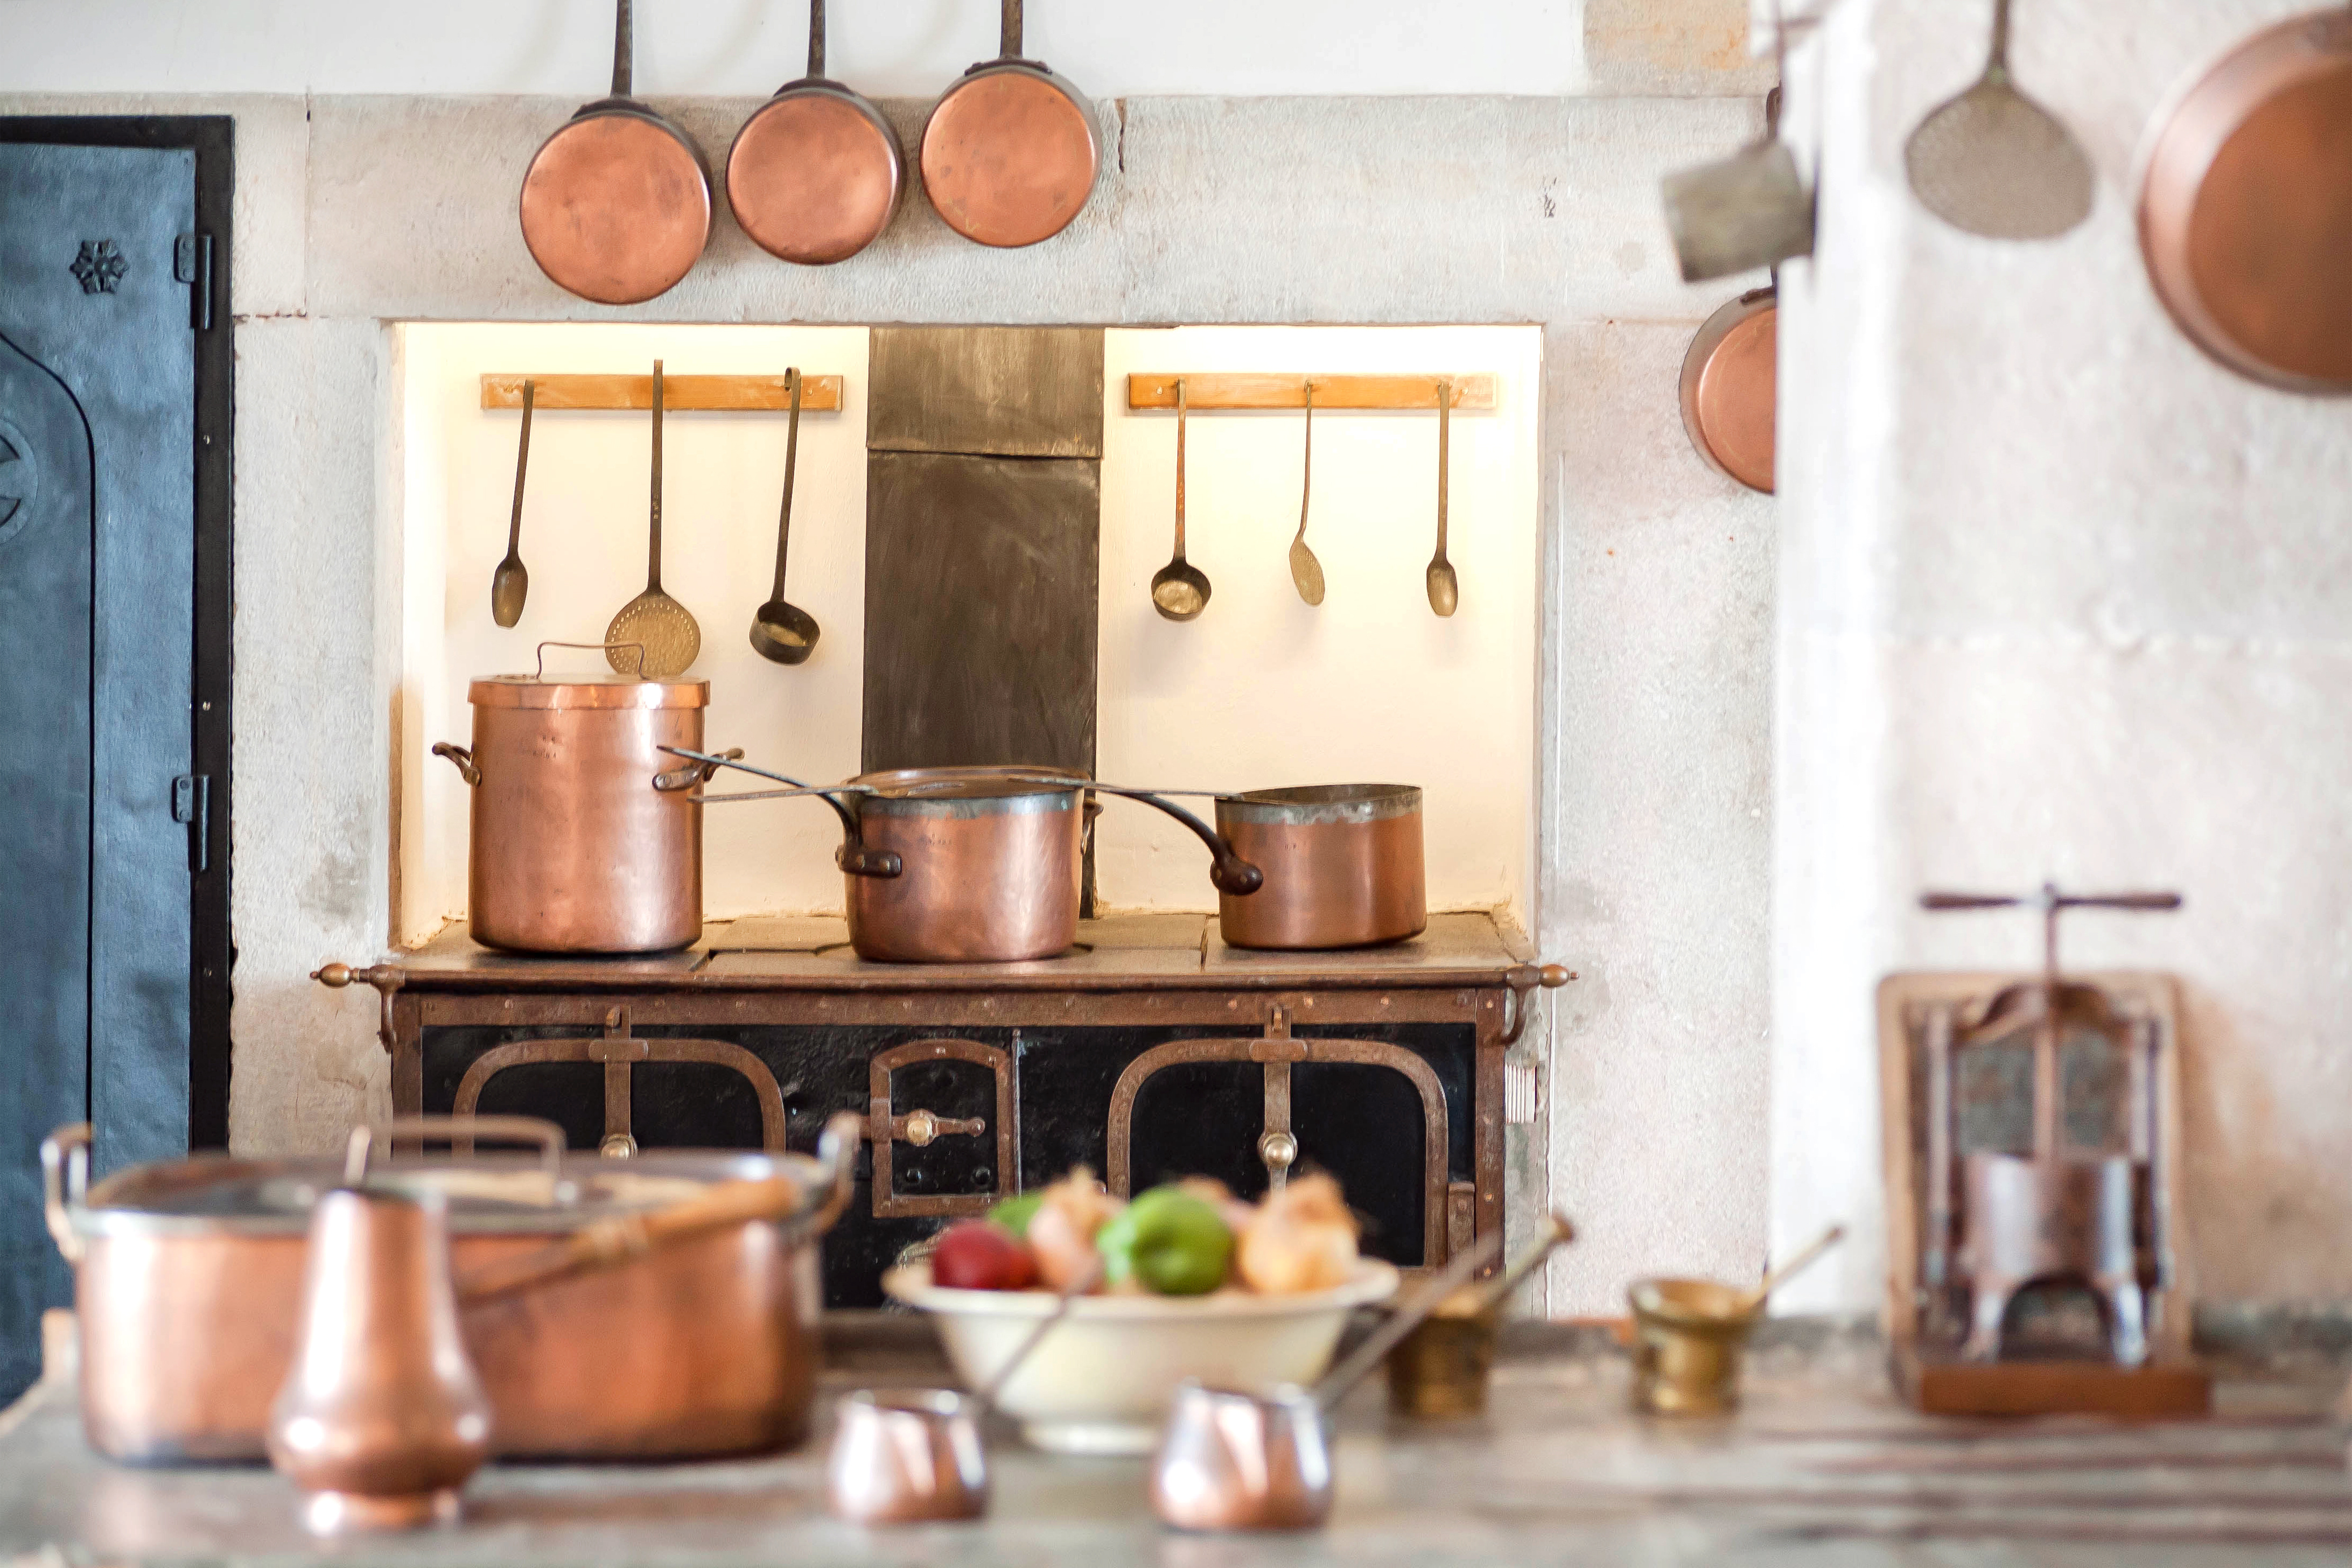 Embrace the clutter in your farmhouse kitchen